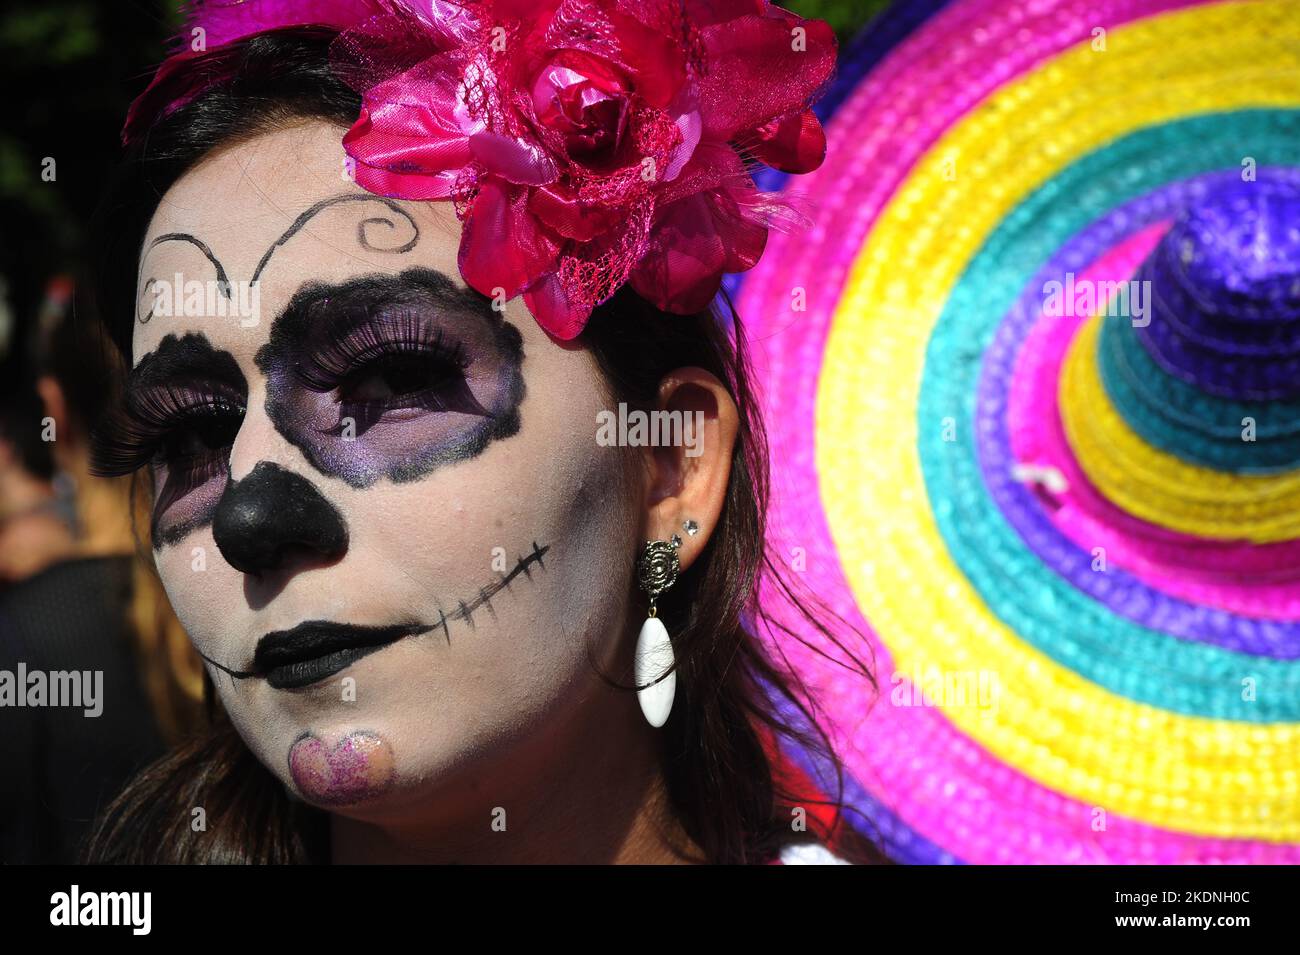 Mexican skull face paint Day of the Dead inspired. Brazilian girls on costume during carnival. Revellers party on street parade Stock Photo